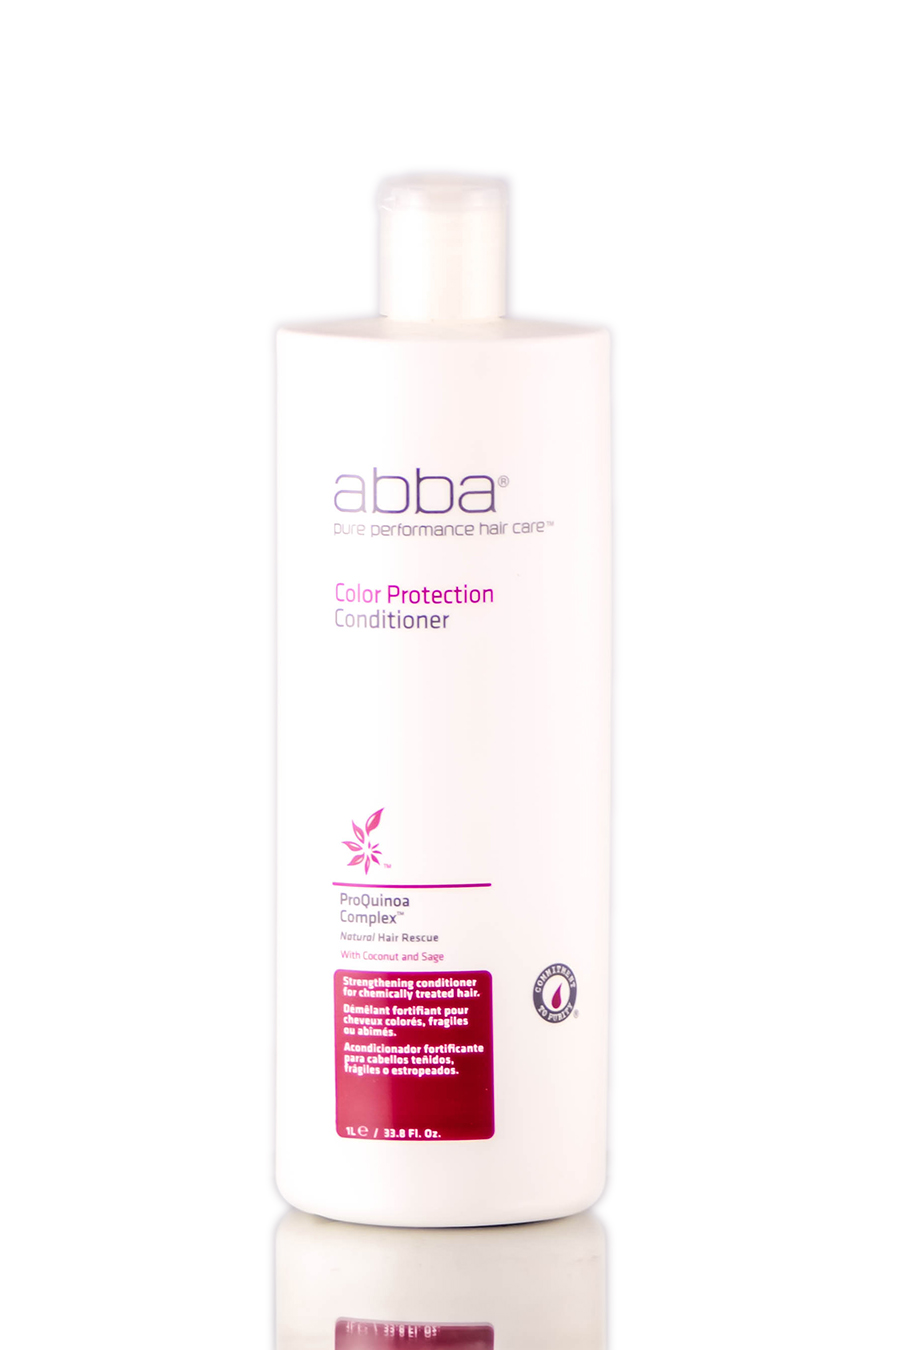 Abba Pure Color Protection Conditioner - 33.8 oz / liter - Pack of 1 with Sleek Comb - image 1 of 1